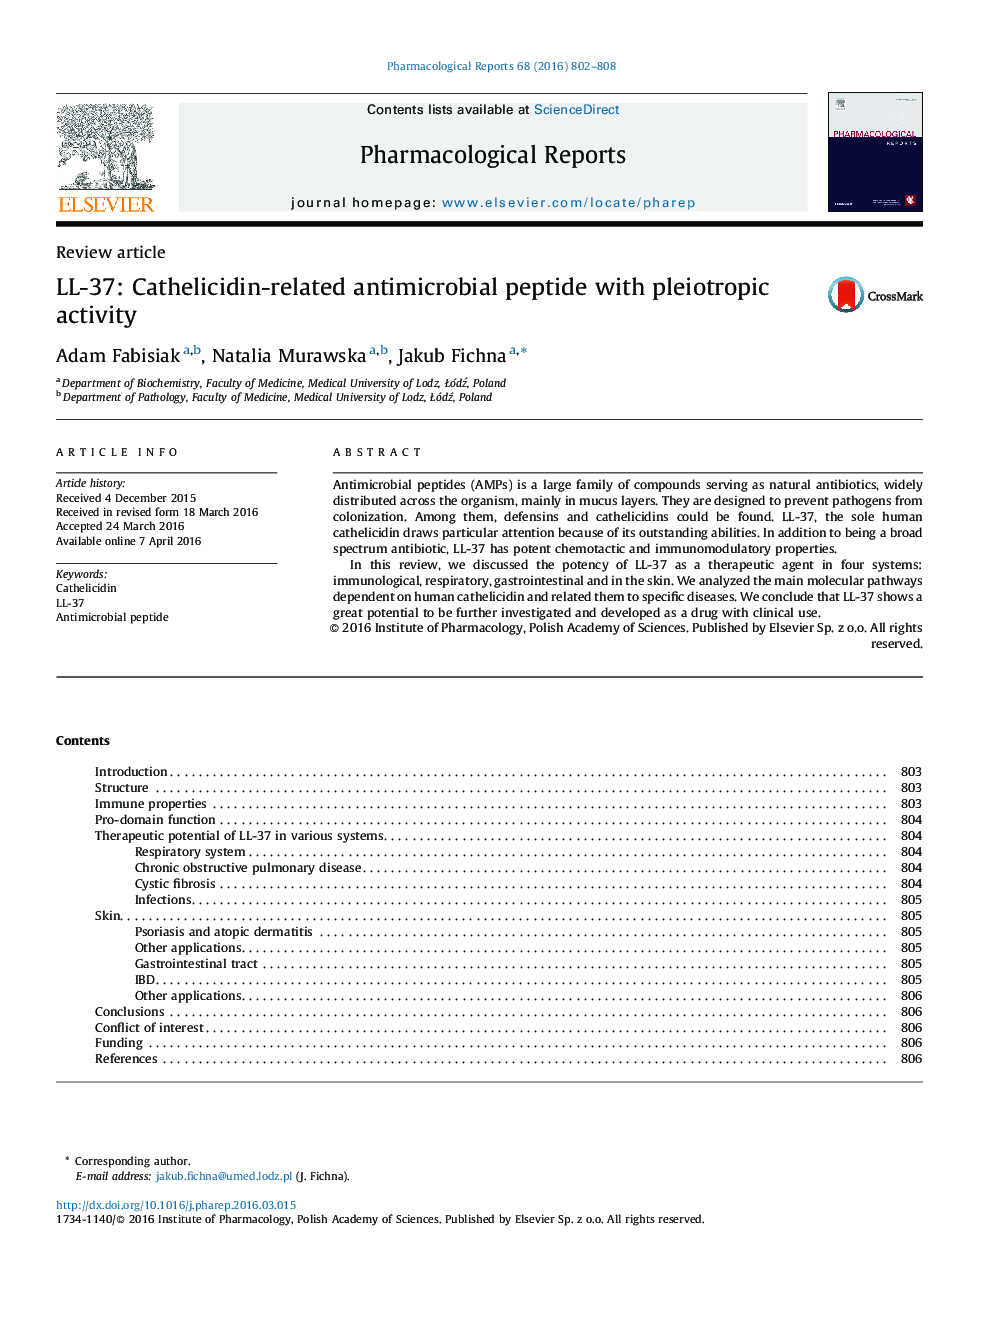 LL-37: Cathelicidin-related antimicrobial peptide with pleiotropic activity